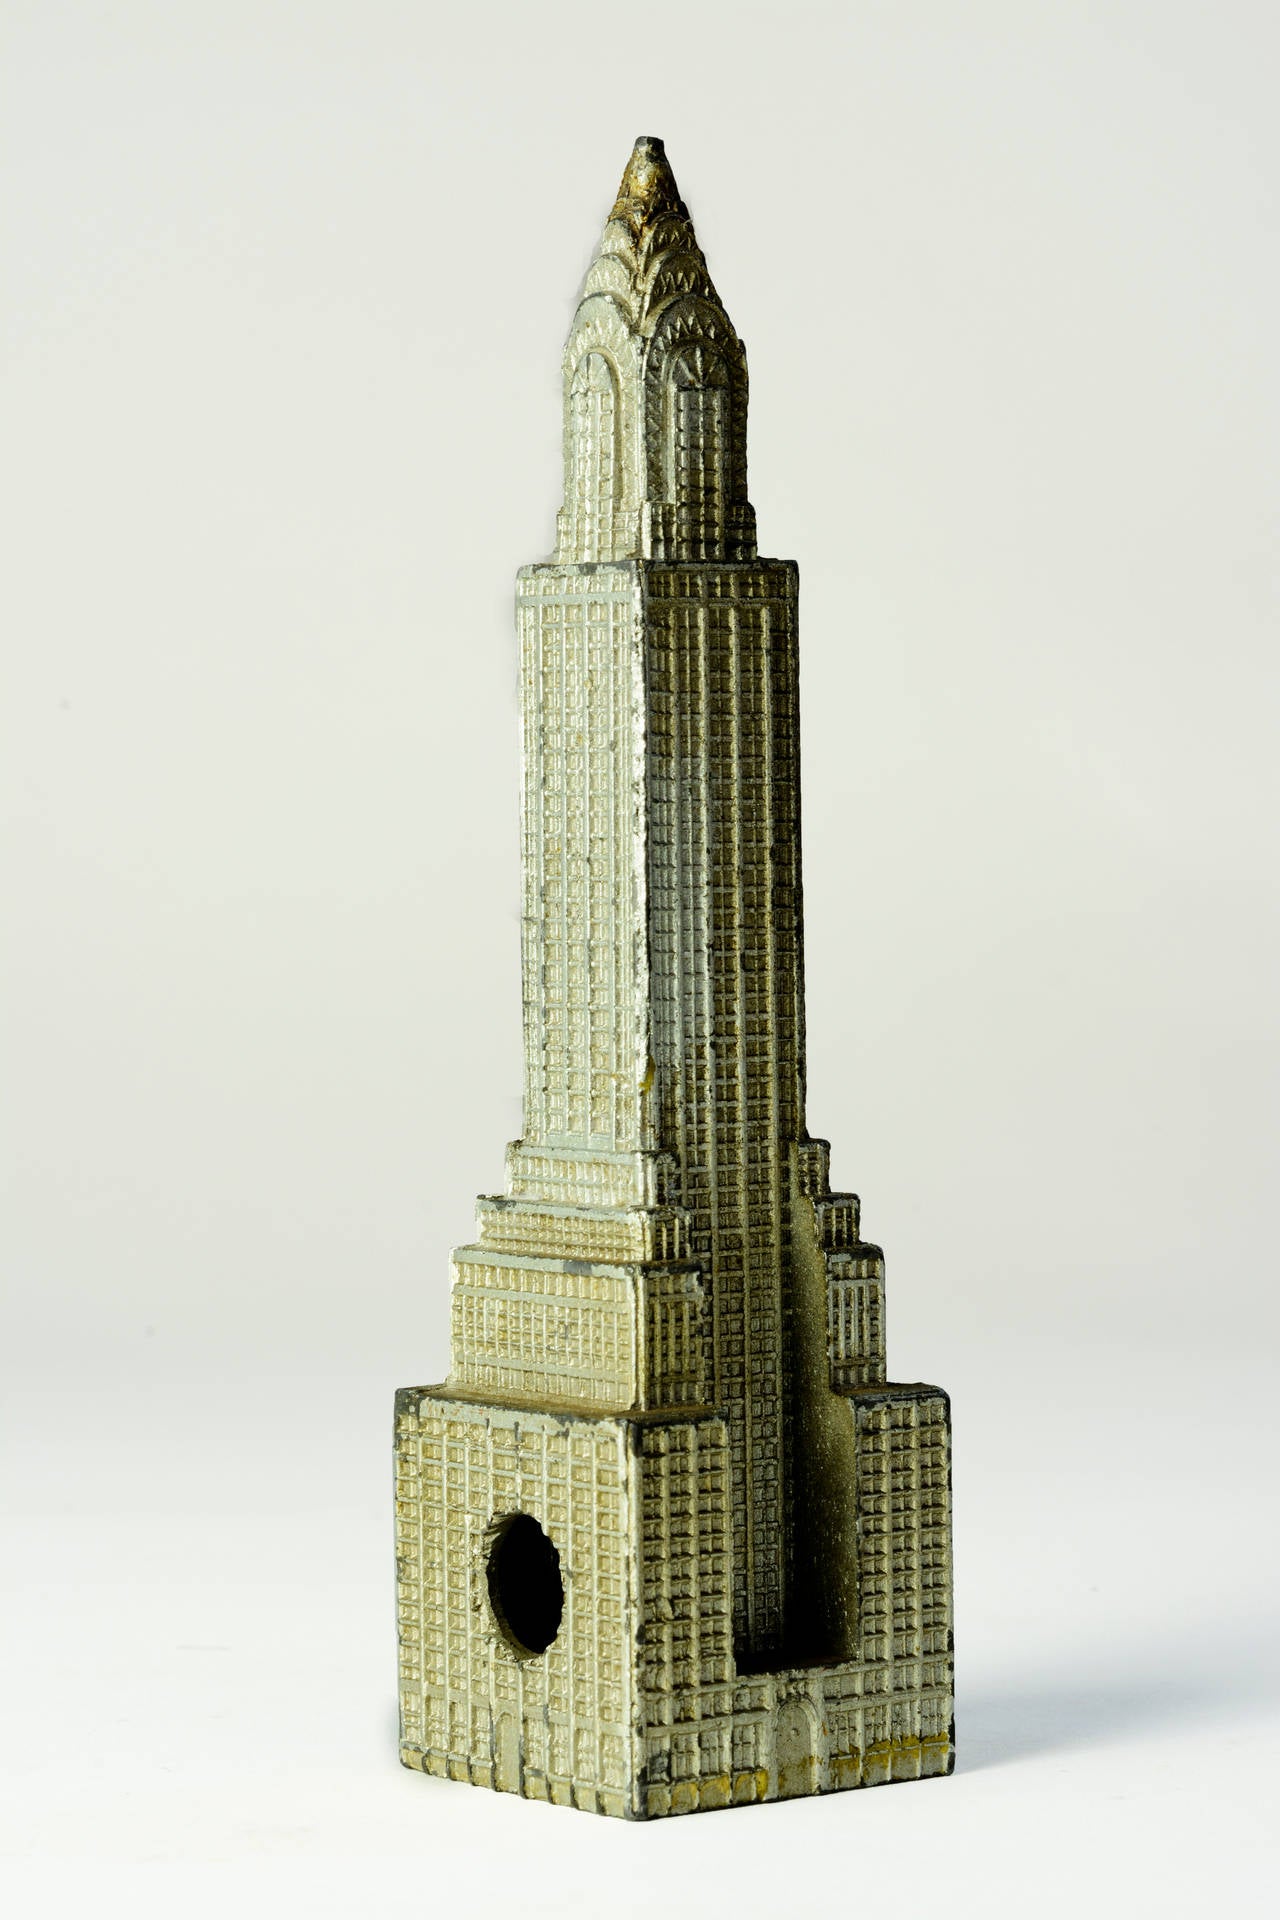 Very Scarce - Three, 1930's Models of the Chrysler Building, New York

Completed in May, 1930, the Chrysler Building was the world’s tallest for just eleven months, when it was surpassed by the Empire State. 

All 1930’s souvenir miniatures of